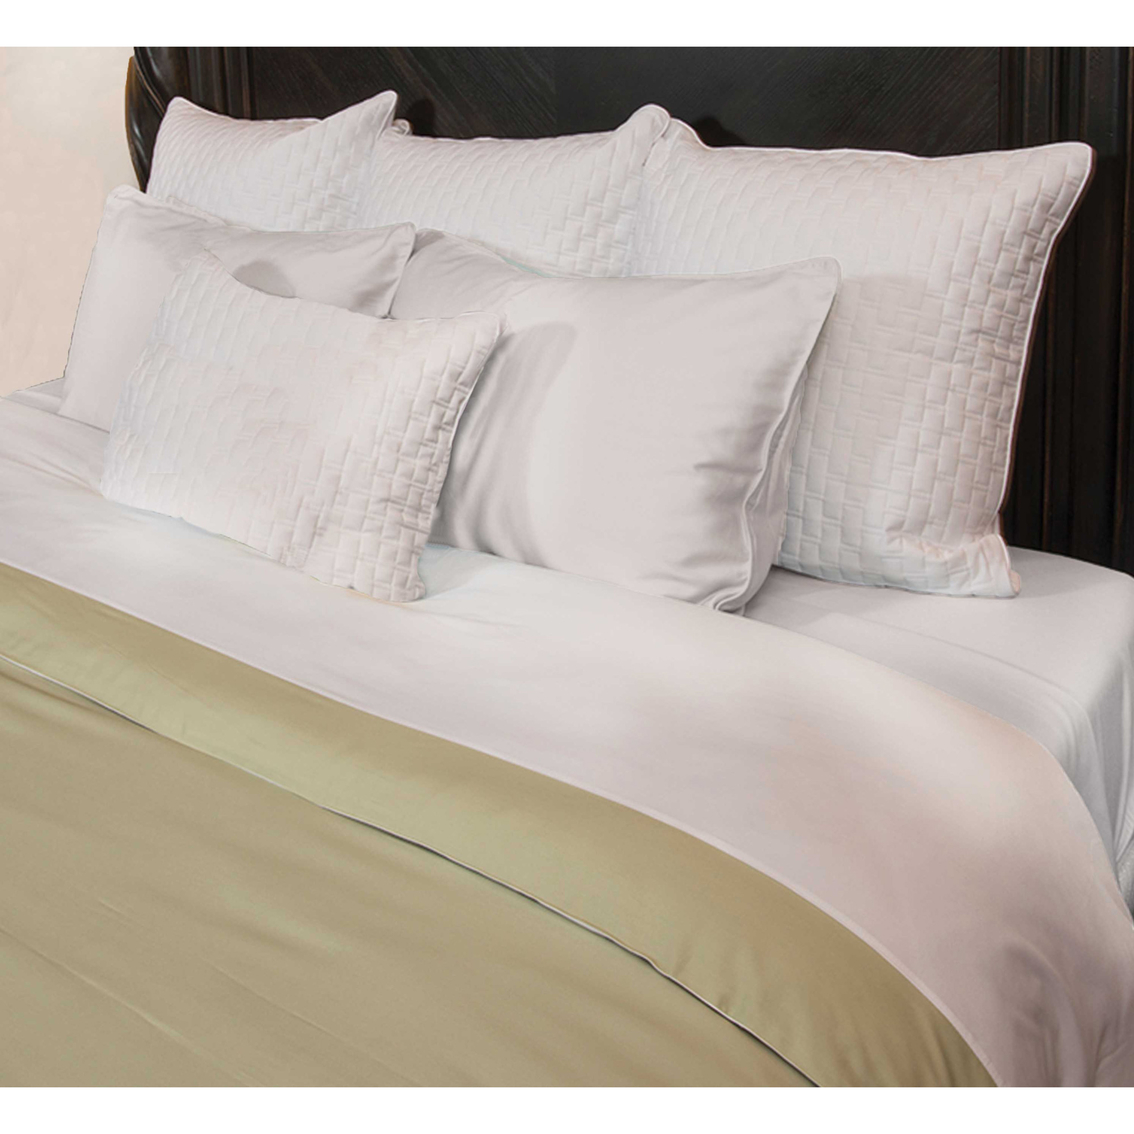 BedVoyage Bamboo Duvet Cover - Image 1 of 5